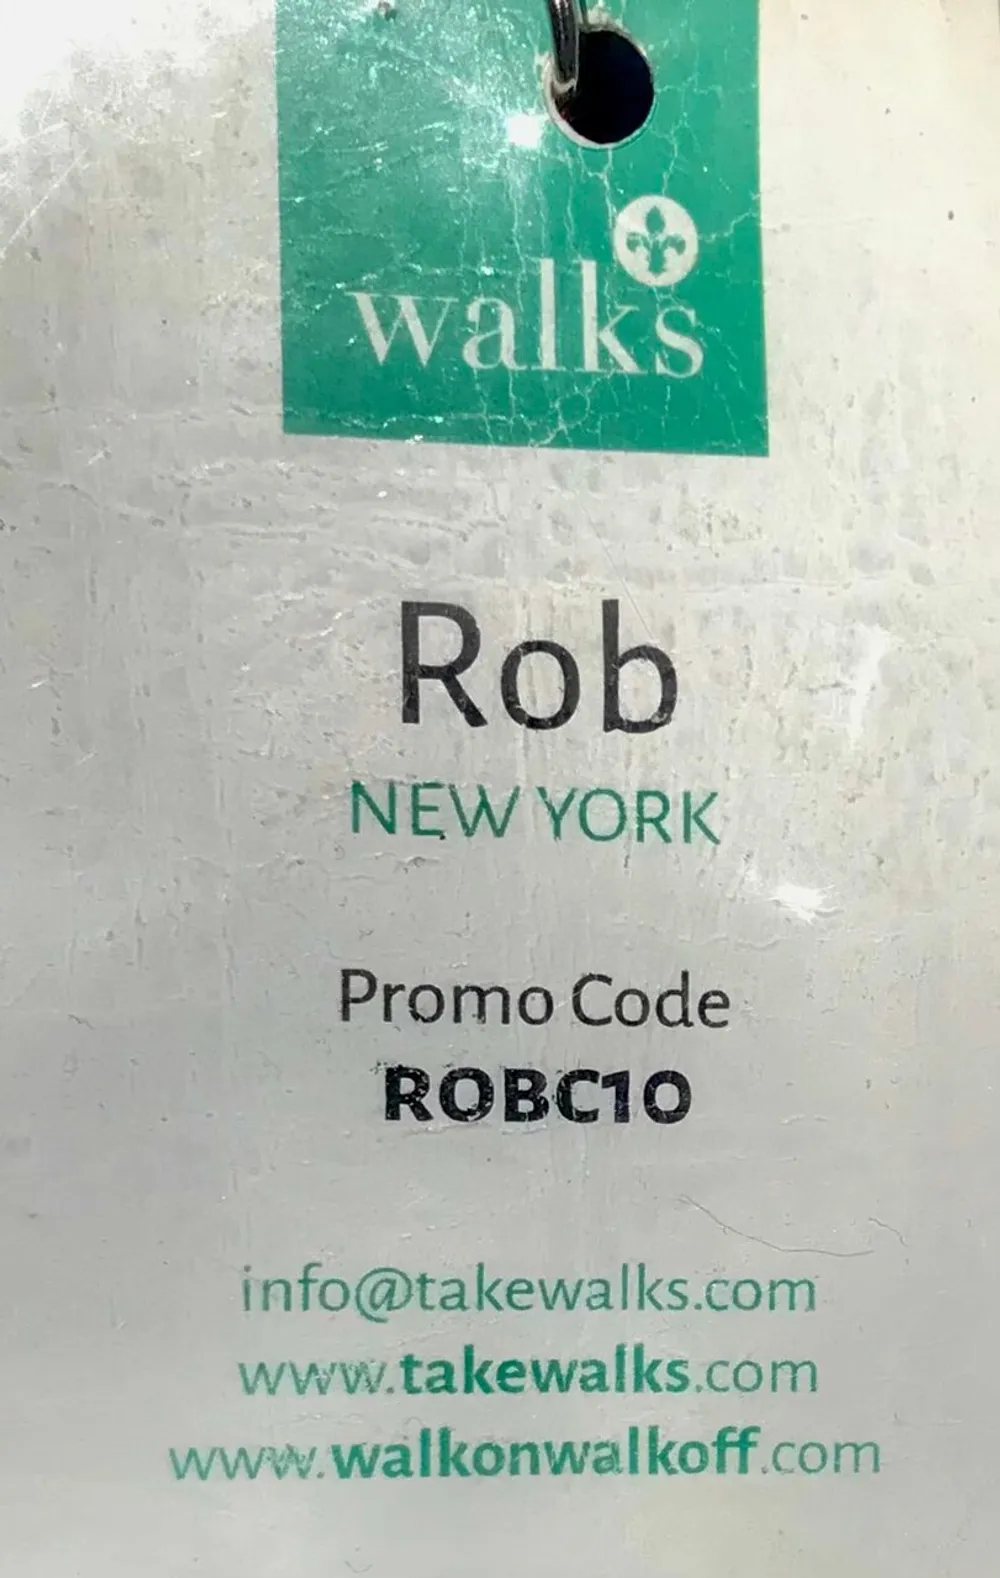 The image shows a worn name tag or badge displaying the name Rob a location New York a promotional code and two website addresses related to walking tours